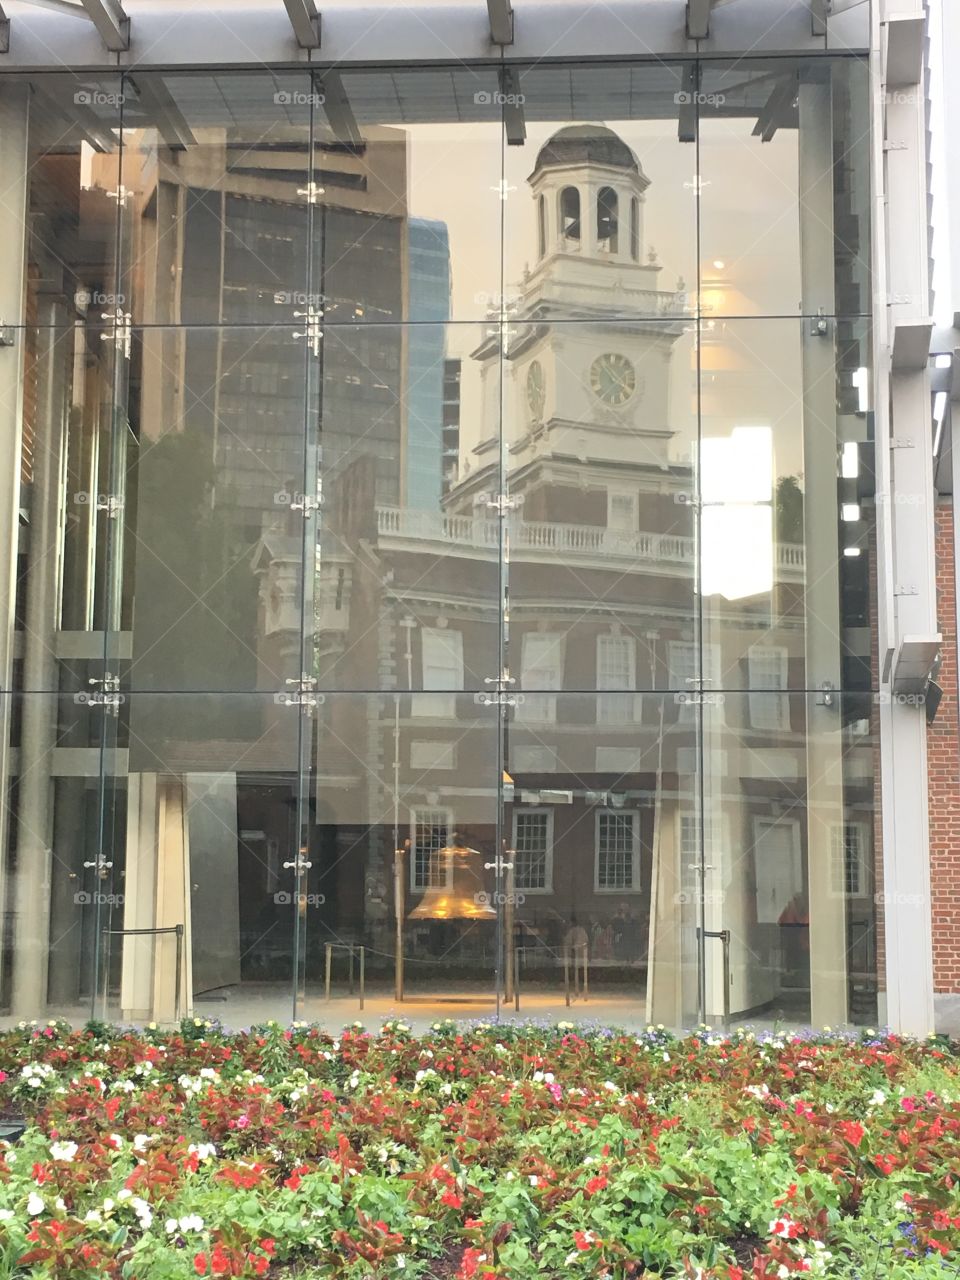 The Liberty Bell with Independence Hall reflected in the window.